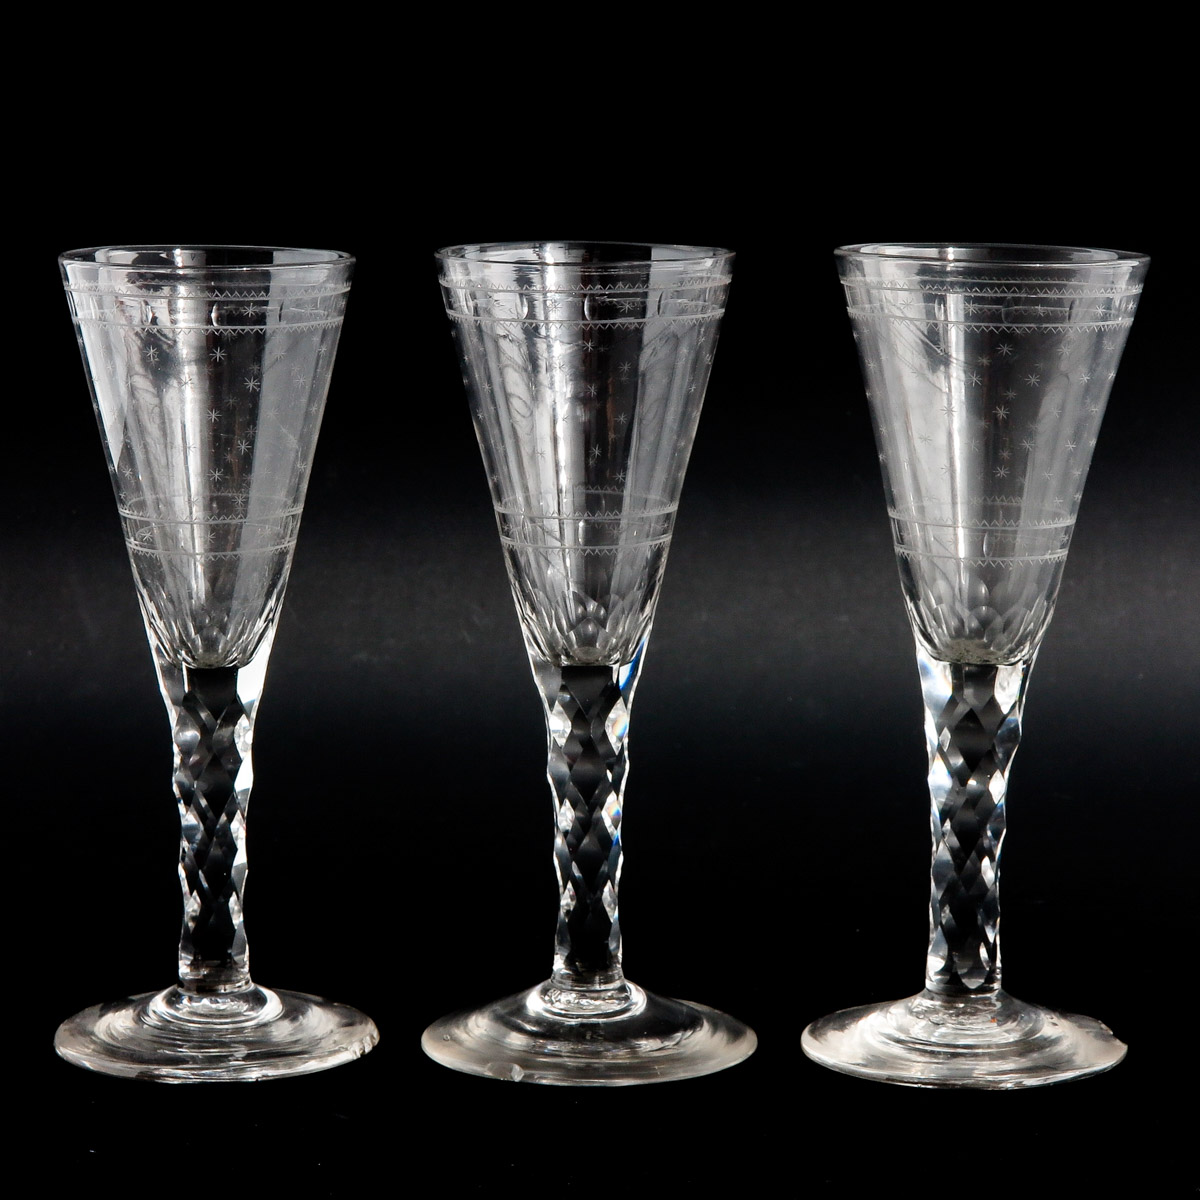 A Set of 3 19th Century Cut Crystal Wine Glasses - Image 4 of 8